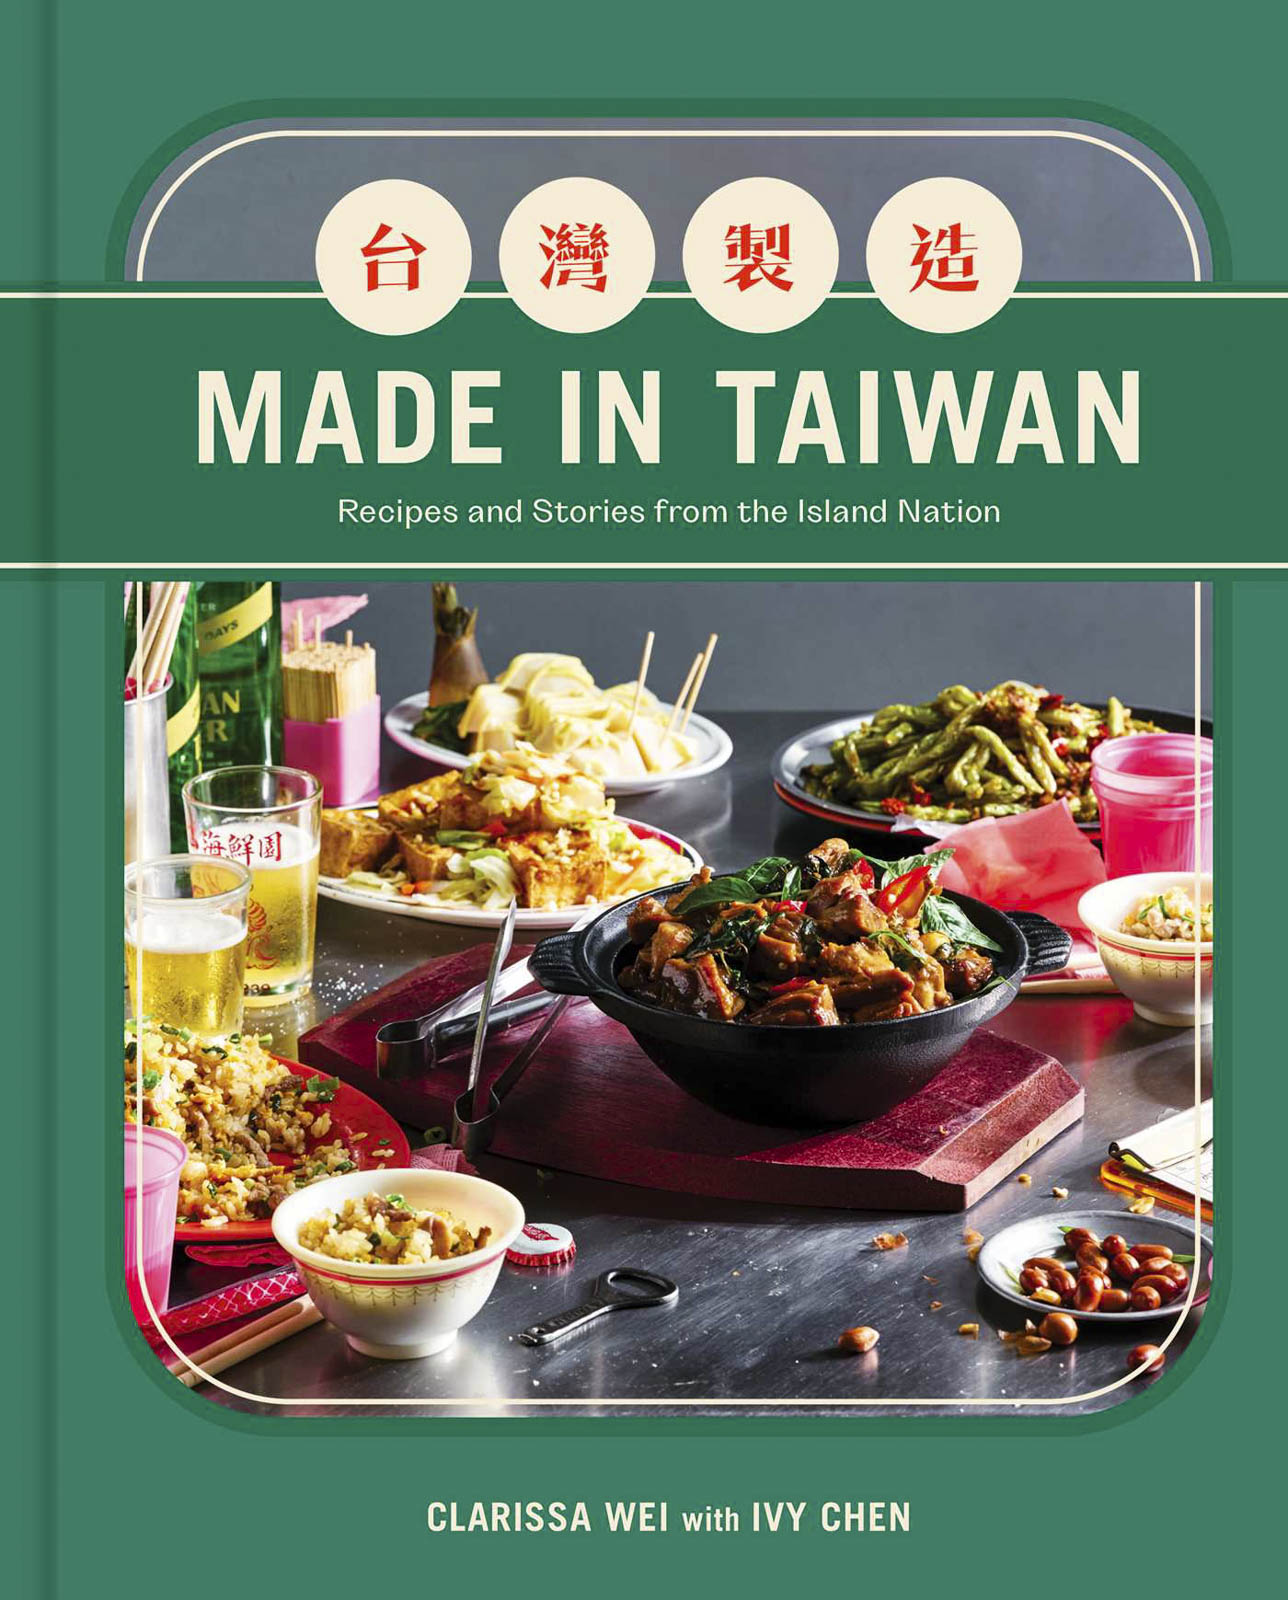 Made In Taiwan by Clarissa Wei with Ivy Chen